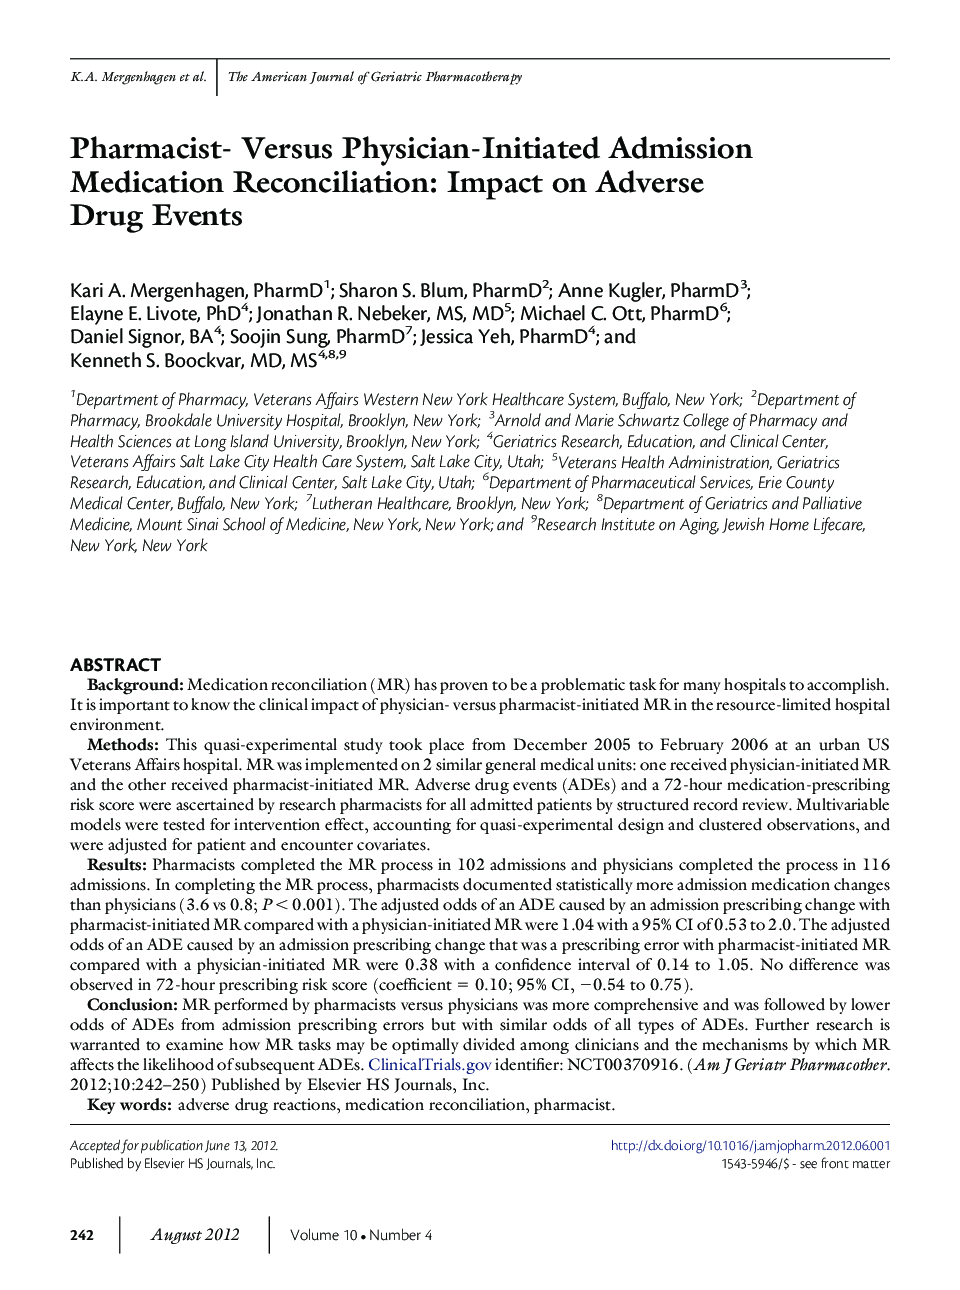 Pharmacist- Versus Physician-Initiated Admission Medication Reconciliation: Impact on Adverse Drug Events